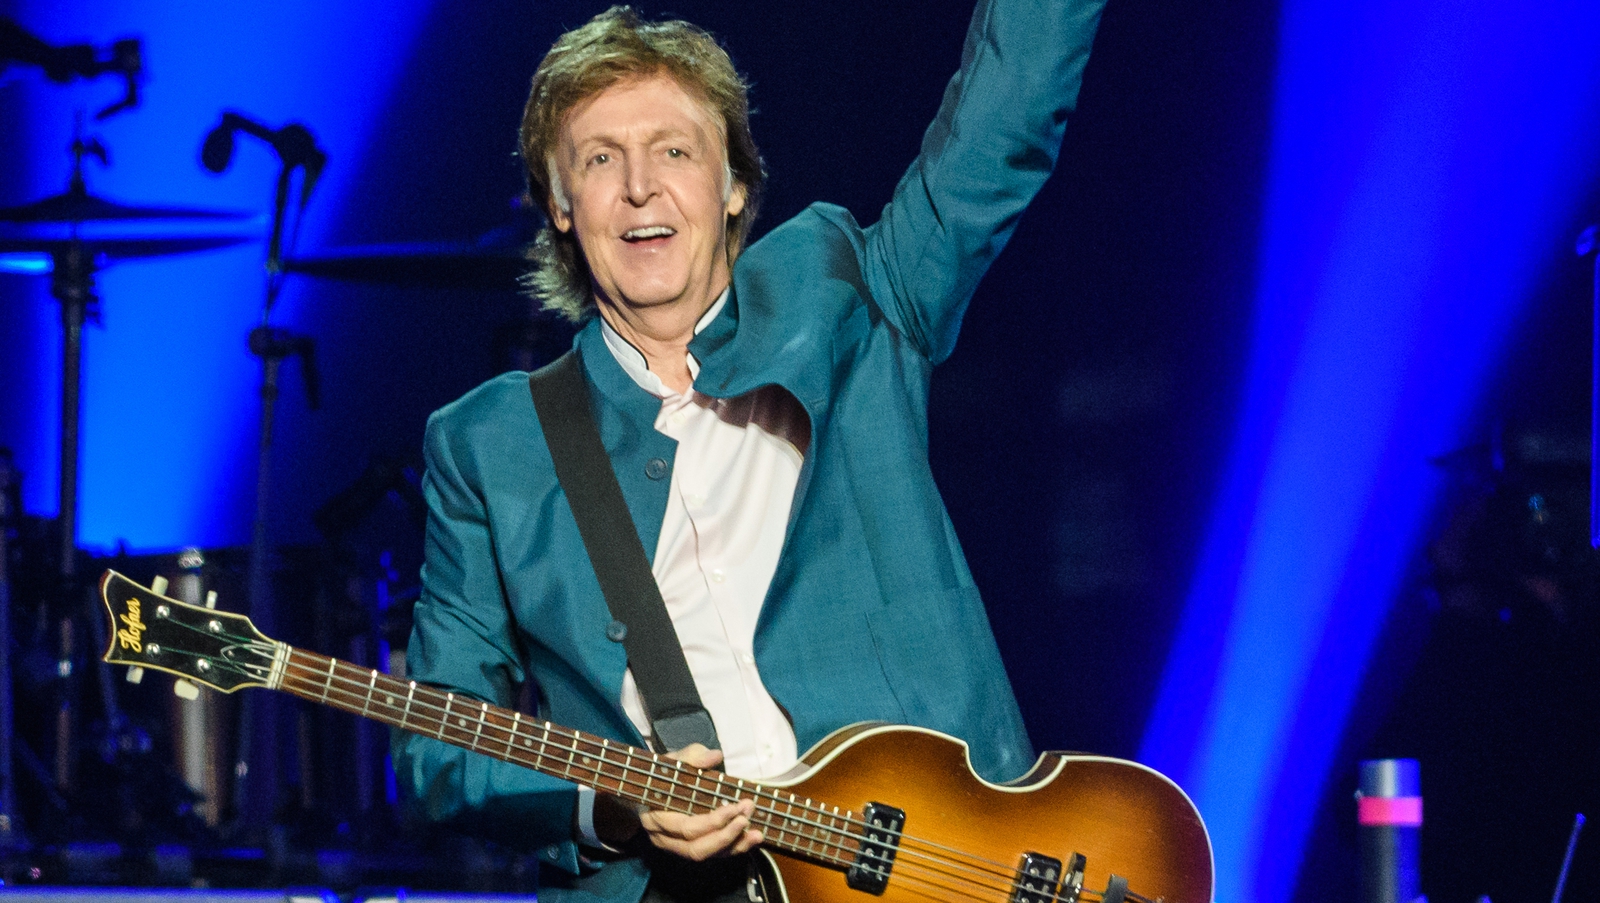 Watch Paul McCartney performing live in New York City